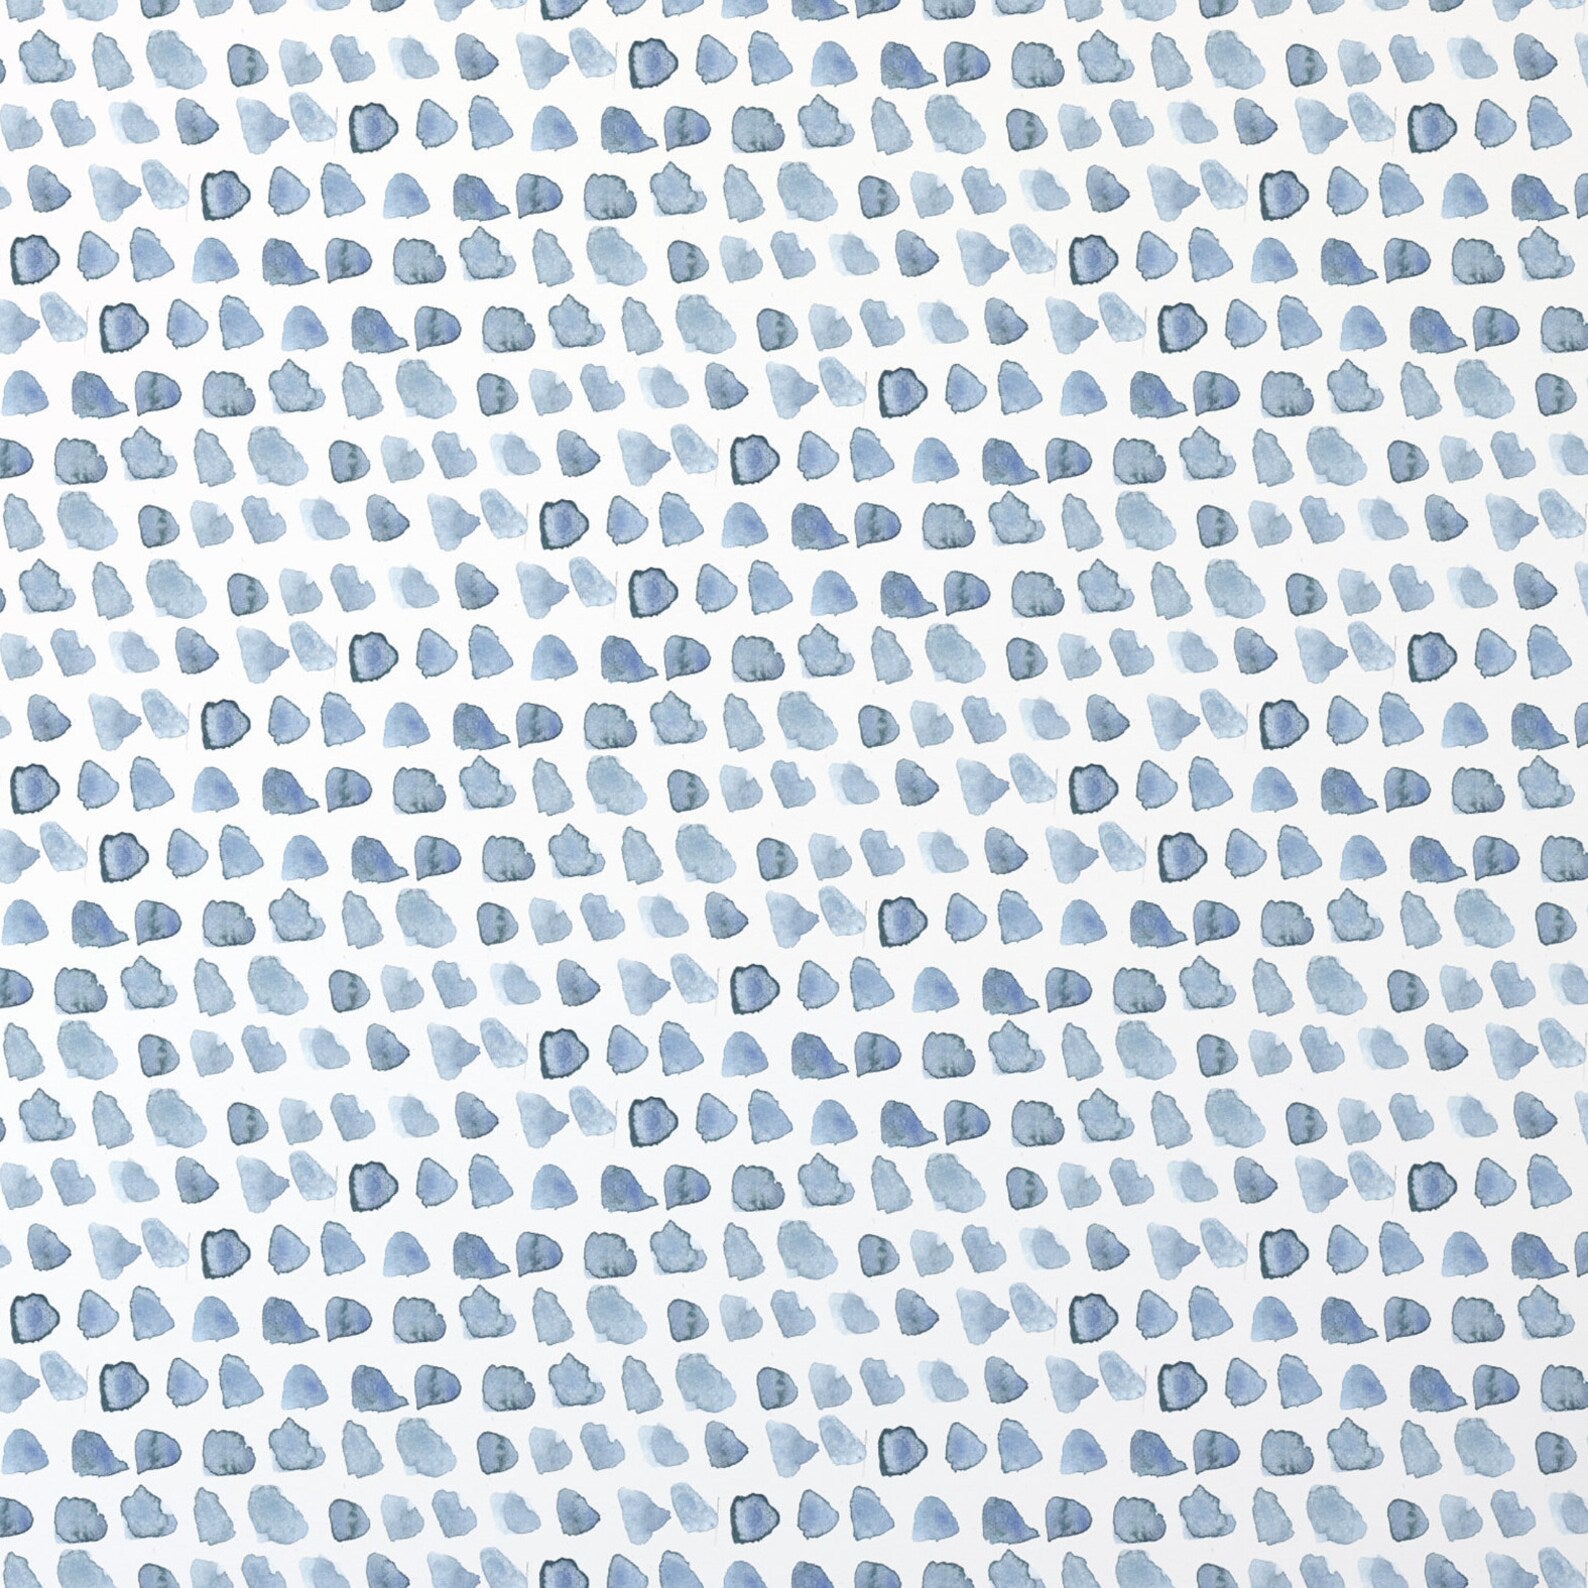 A detailed view of the Hand Painted Dots Wallpaper - Blue, showcasing an array of blue watercolor dots in various shades and opacities against a white background, creating a playful and organic pattern.